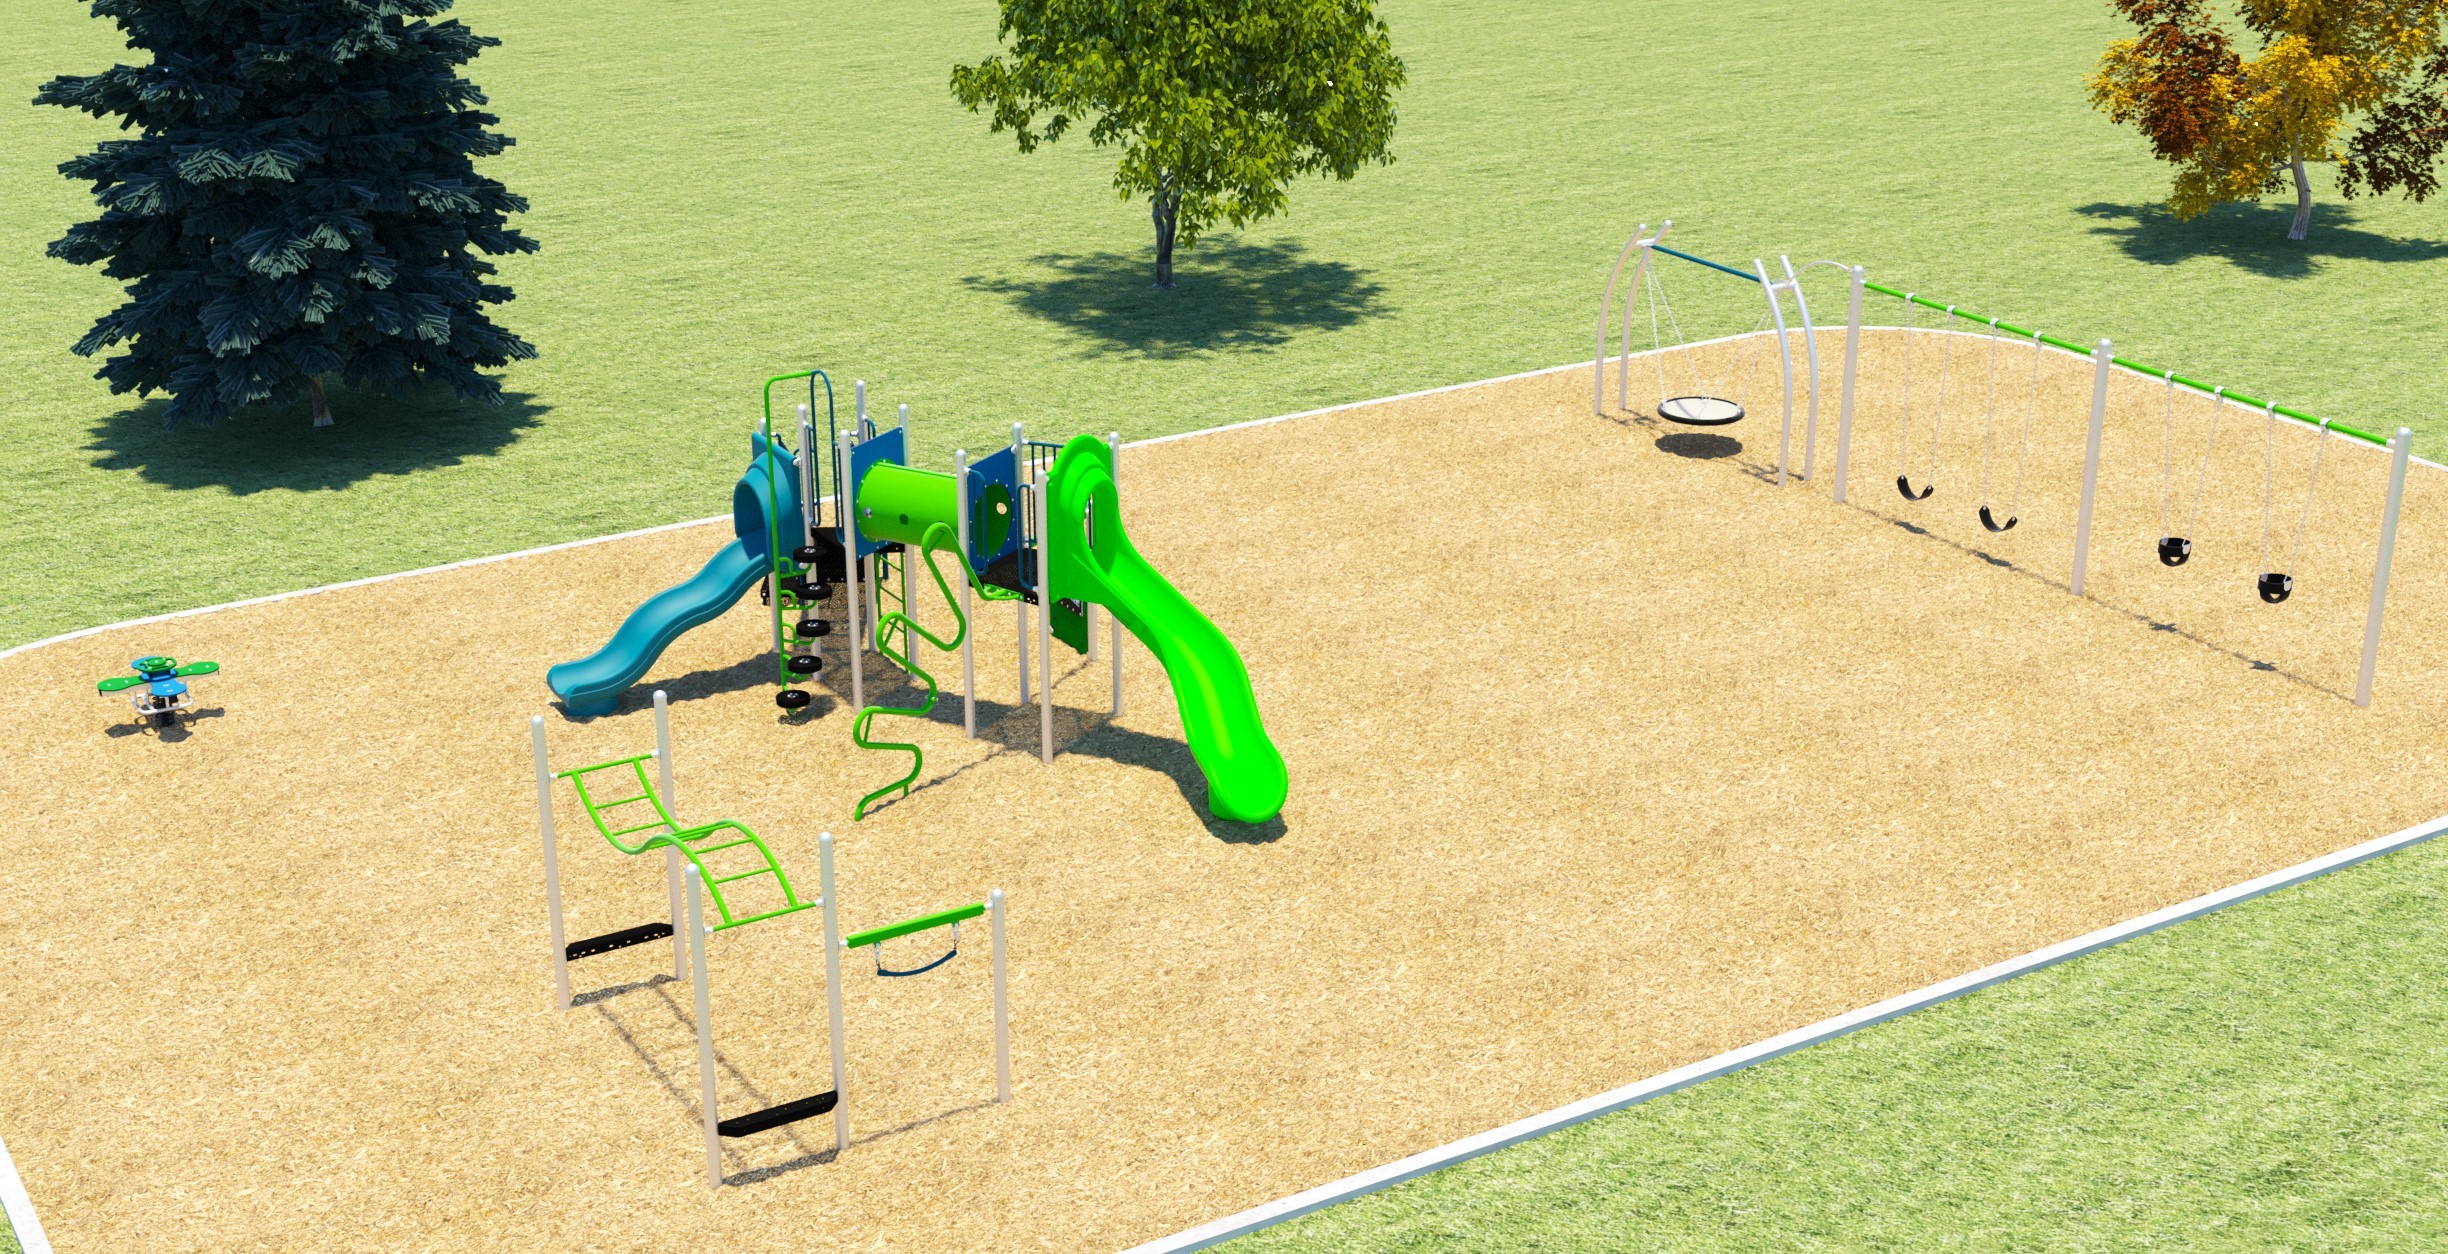 Playground Design C for the Dunlop Park Playground improvements, with features as described below.